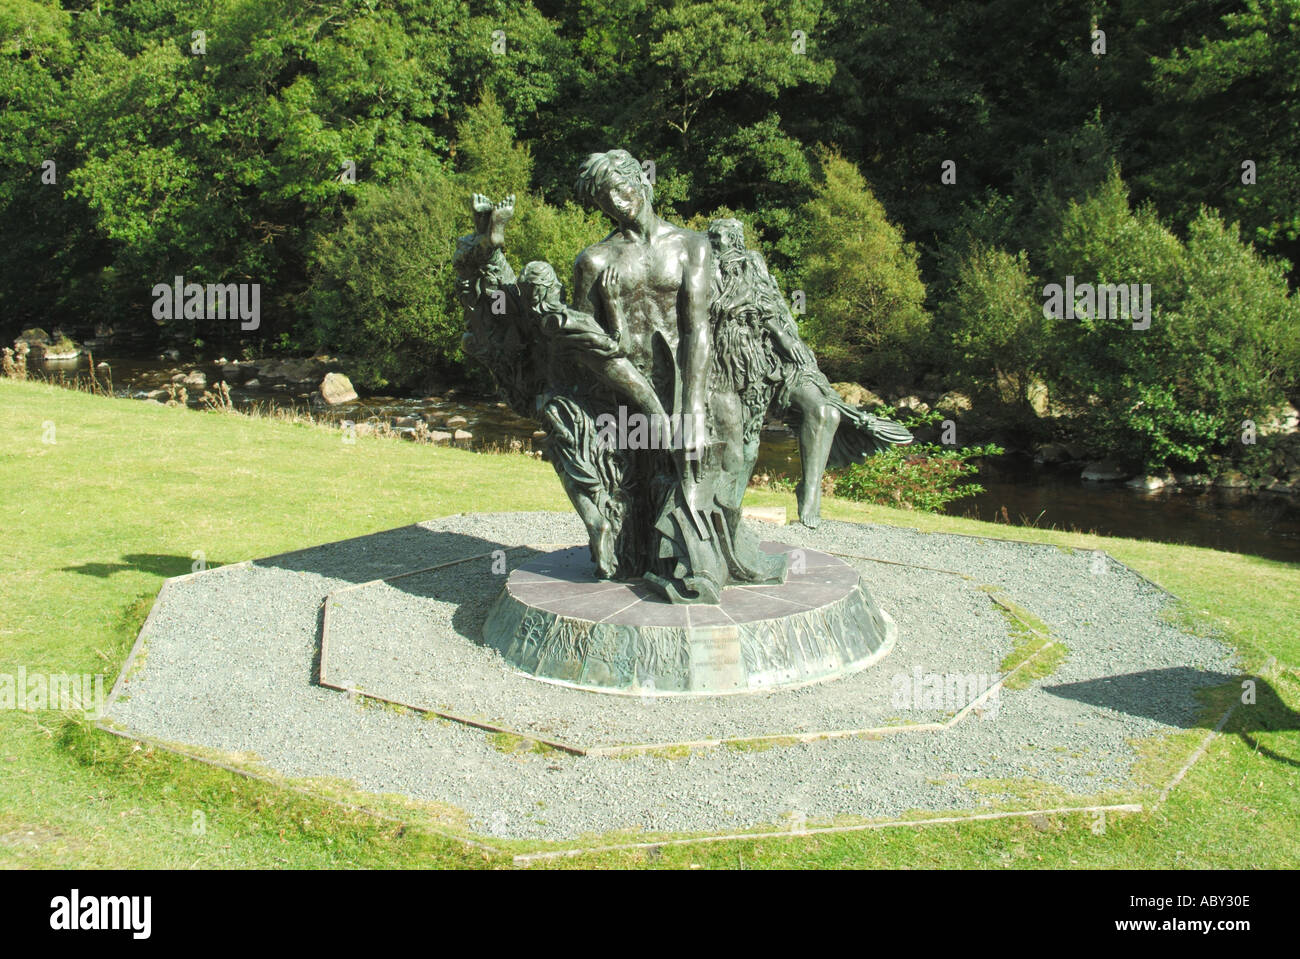 Statue sculpture of poet Shelley by sculptor Christopher Kelly in 1998 stands in Elan Valley Visitor Centre beside River Elan Rhayader Powys Wales UK Stock Photo